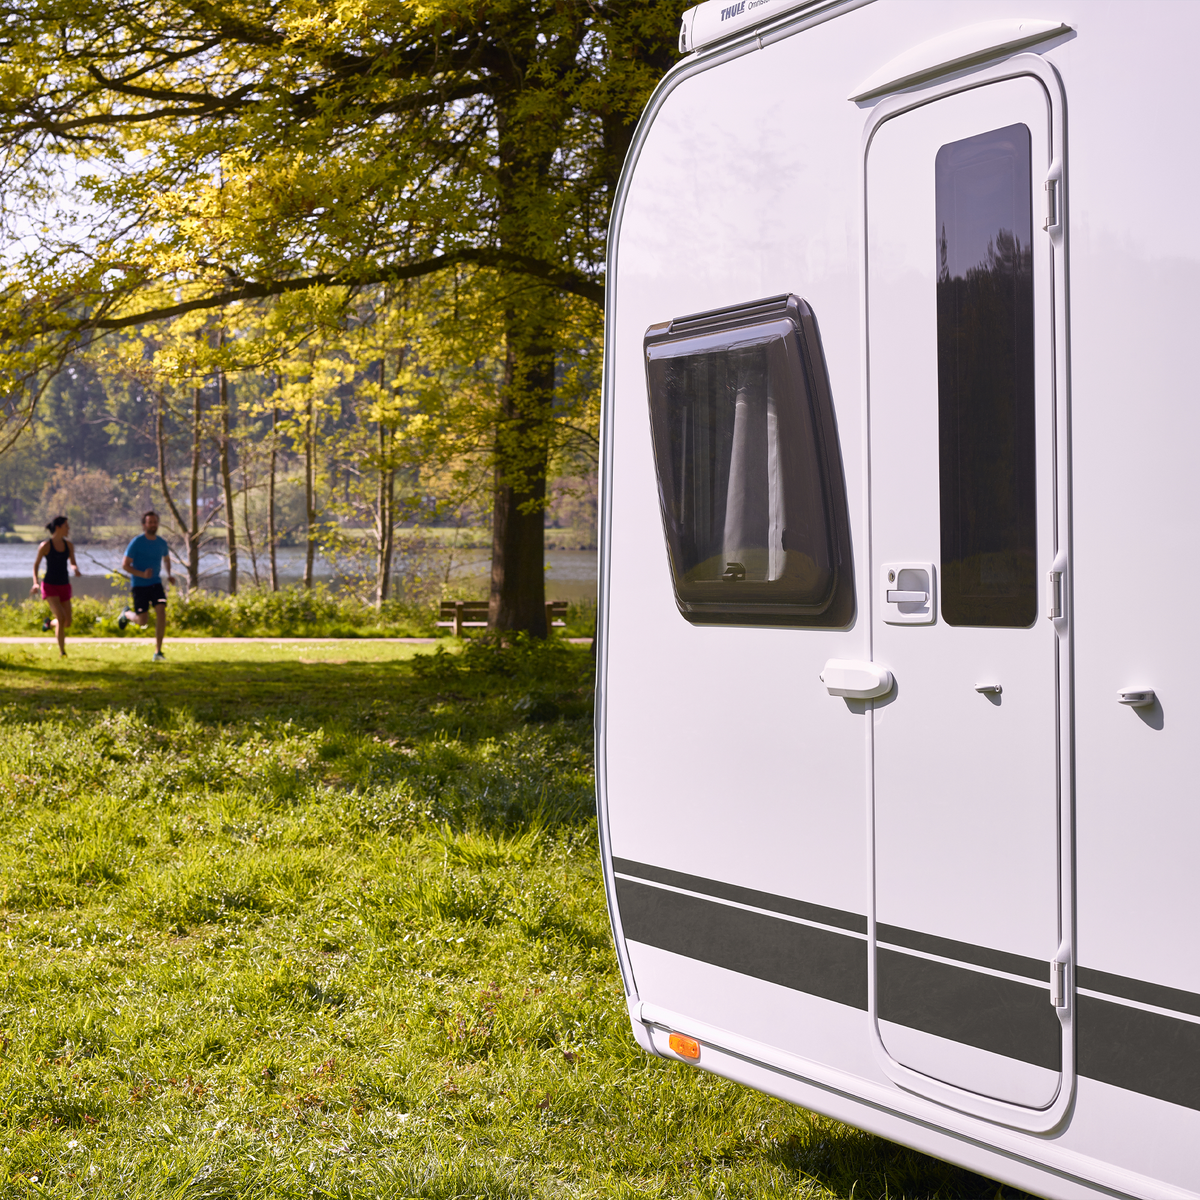 A caravan is parked in the grass and has a Thule Universal Lock caravan lock.